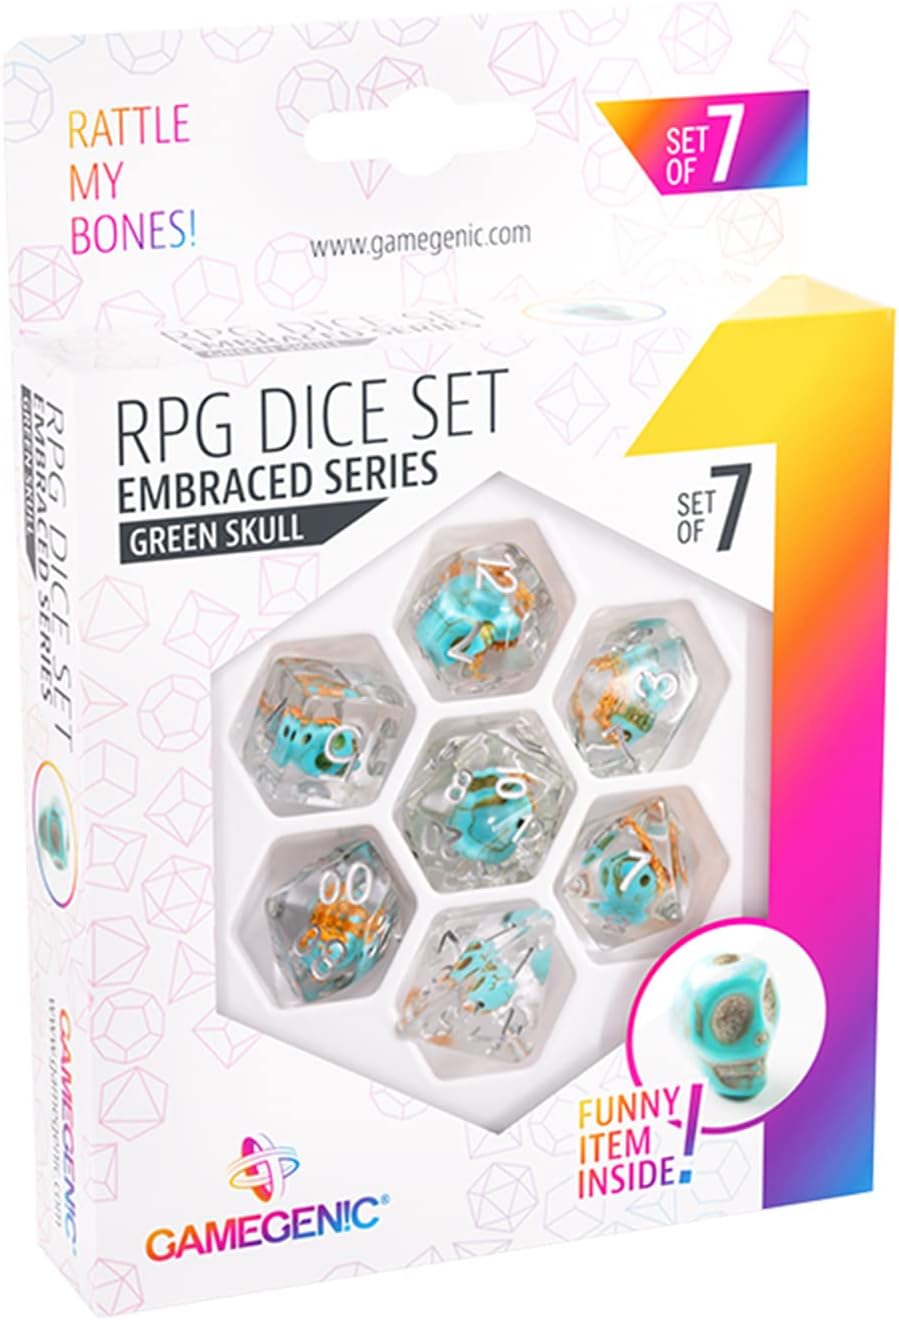 Embraced Series RPG Dice Set | Set of 7 Dice in a Variety of Sizes Designed for